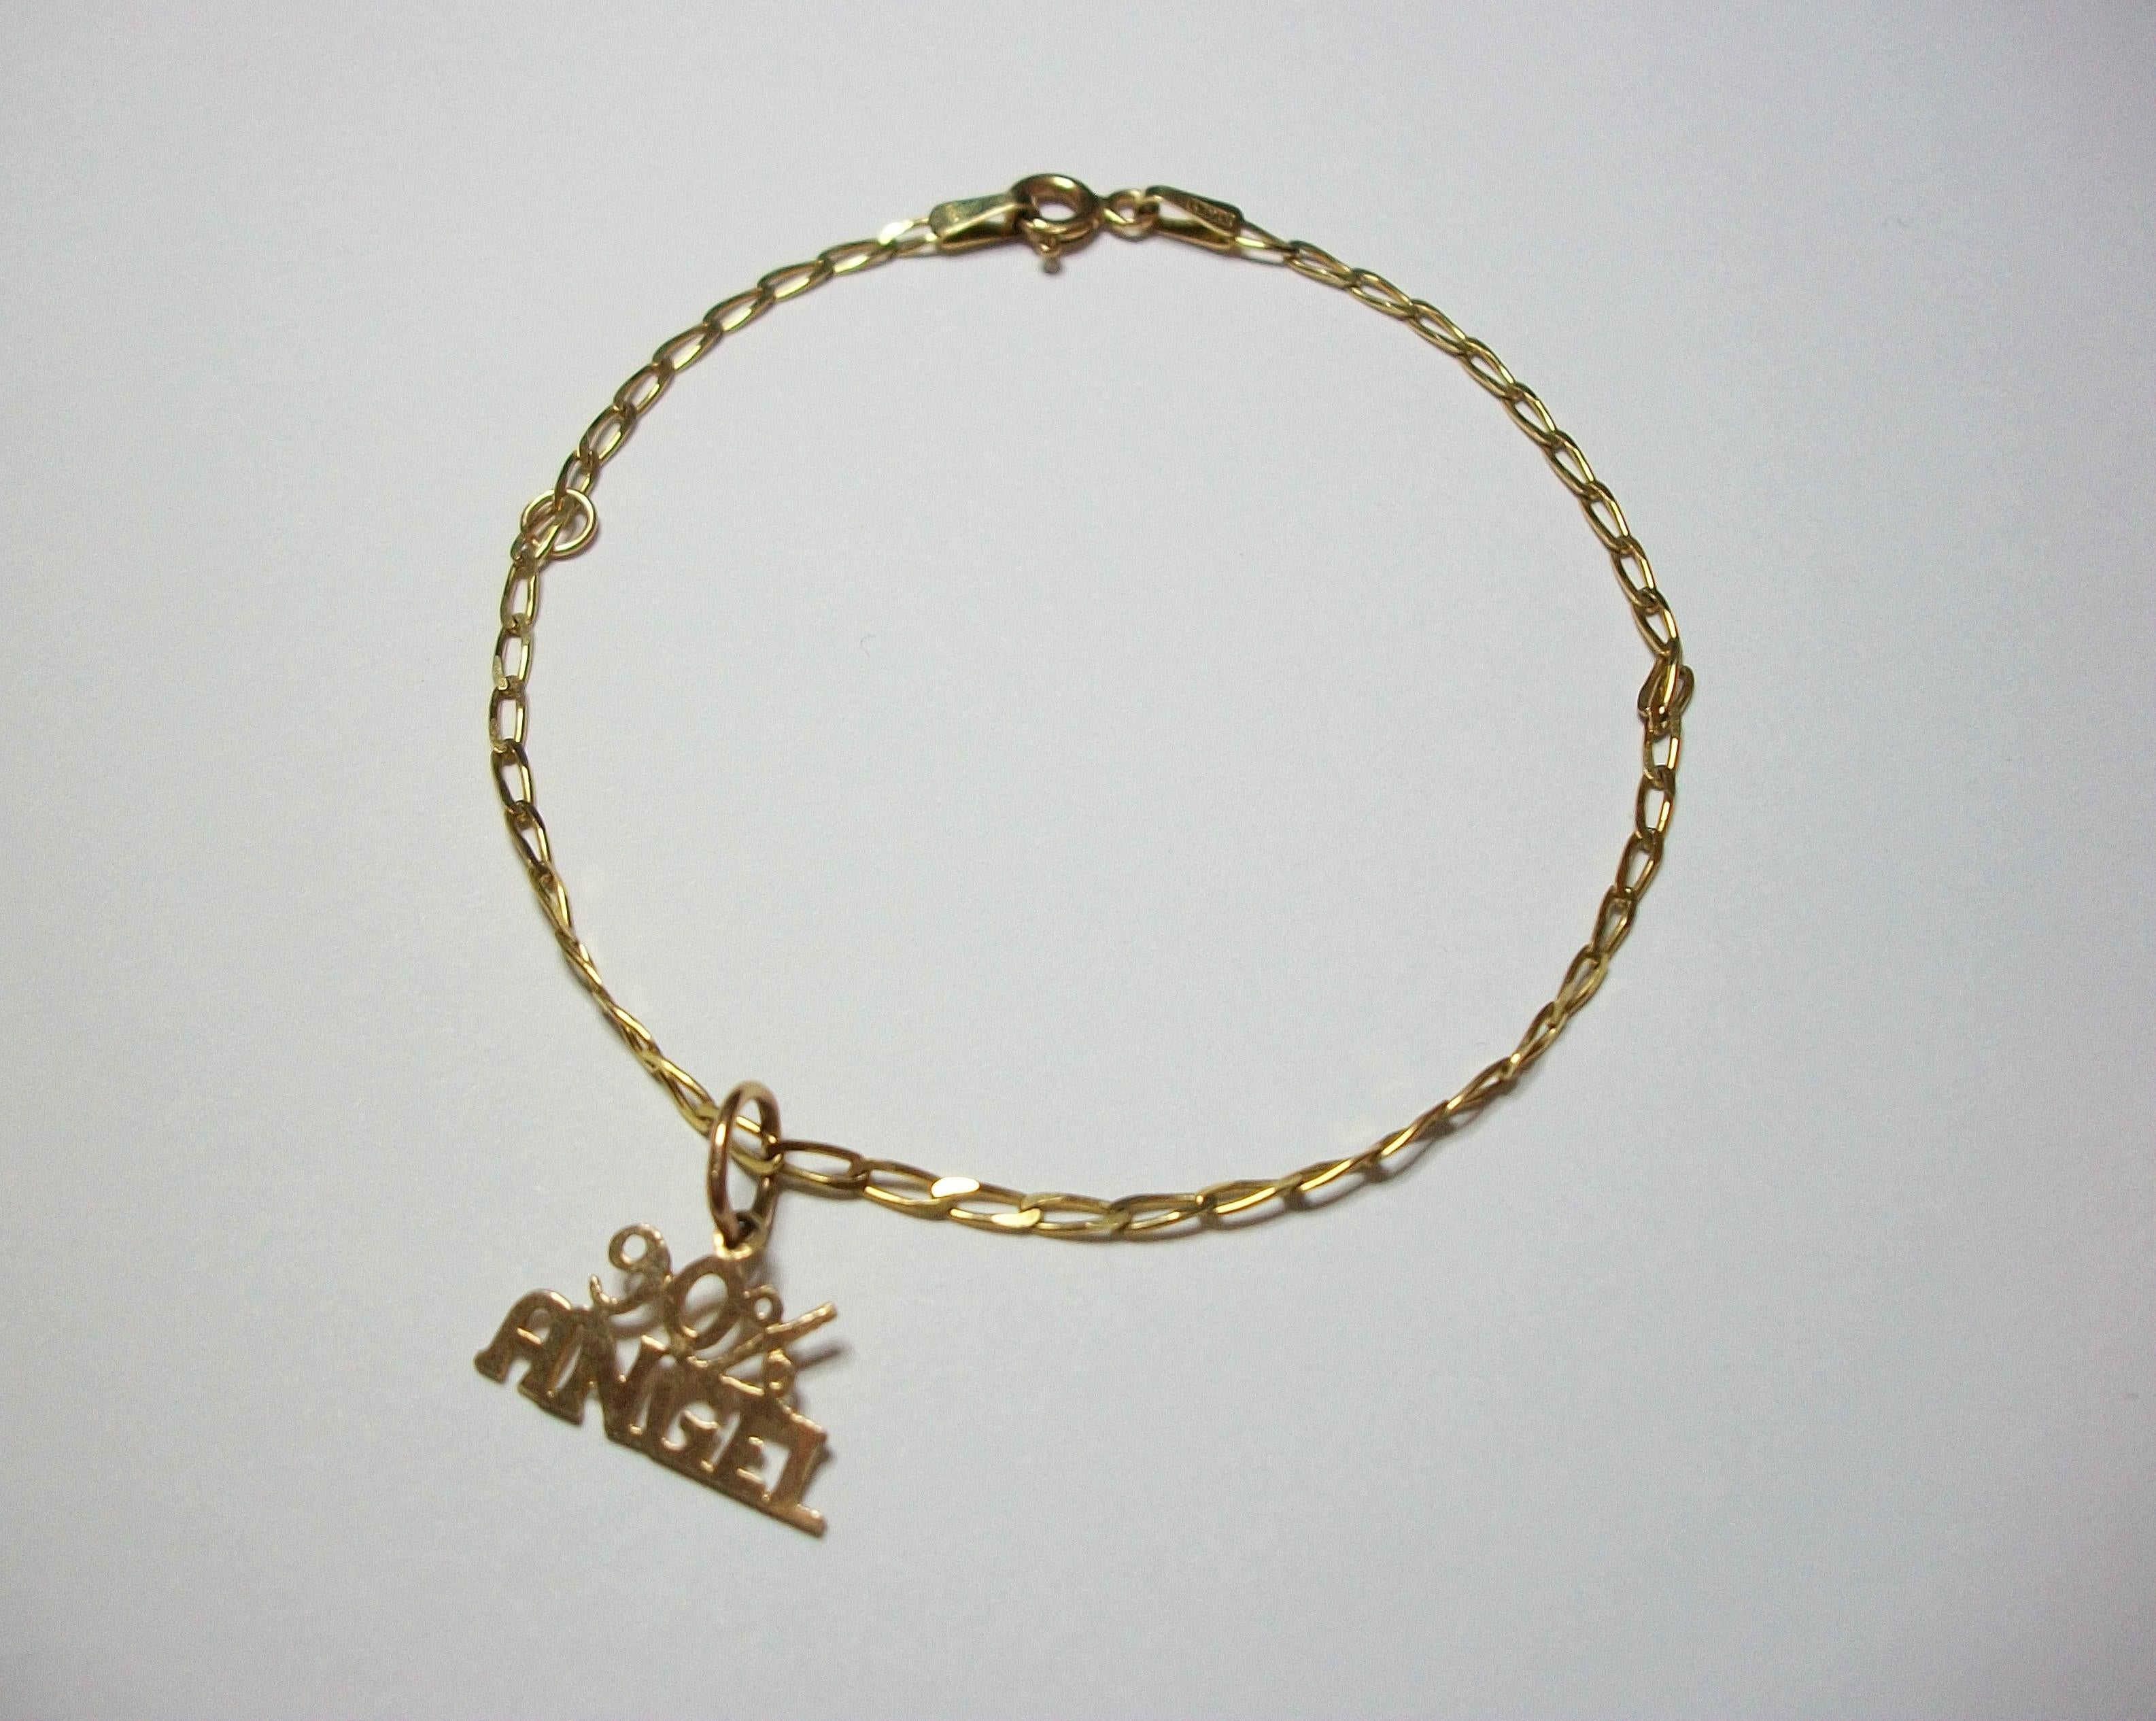 Vintage 10K Gold Chain Link Bracelet - 90% Angel Charm - Signed - Italy - 20th C In Good Condition For Sale In Chatham, CA